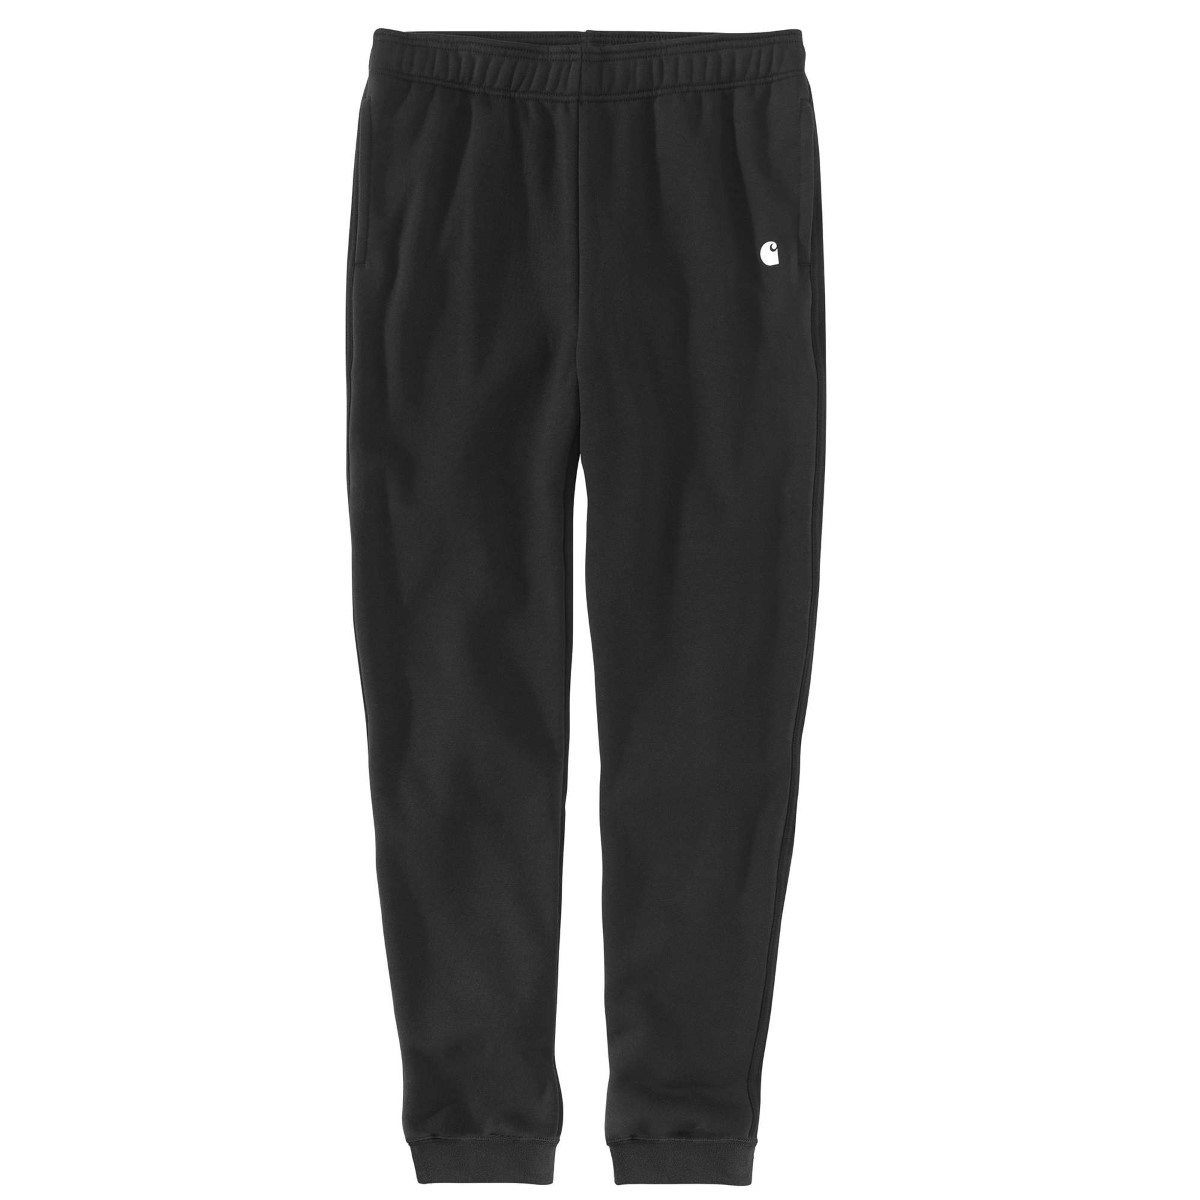 Carhartt Men's 105307 Relaxed Fit Midweight Tapered Sweatpants, Black